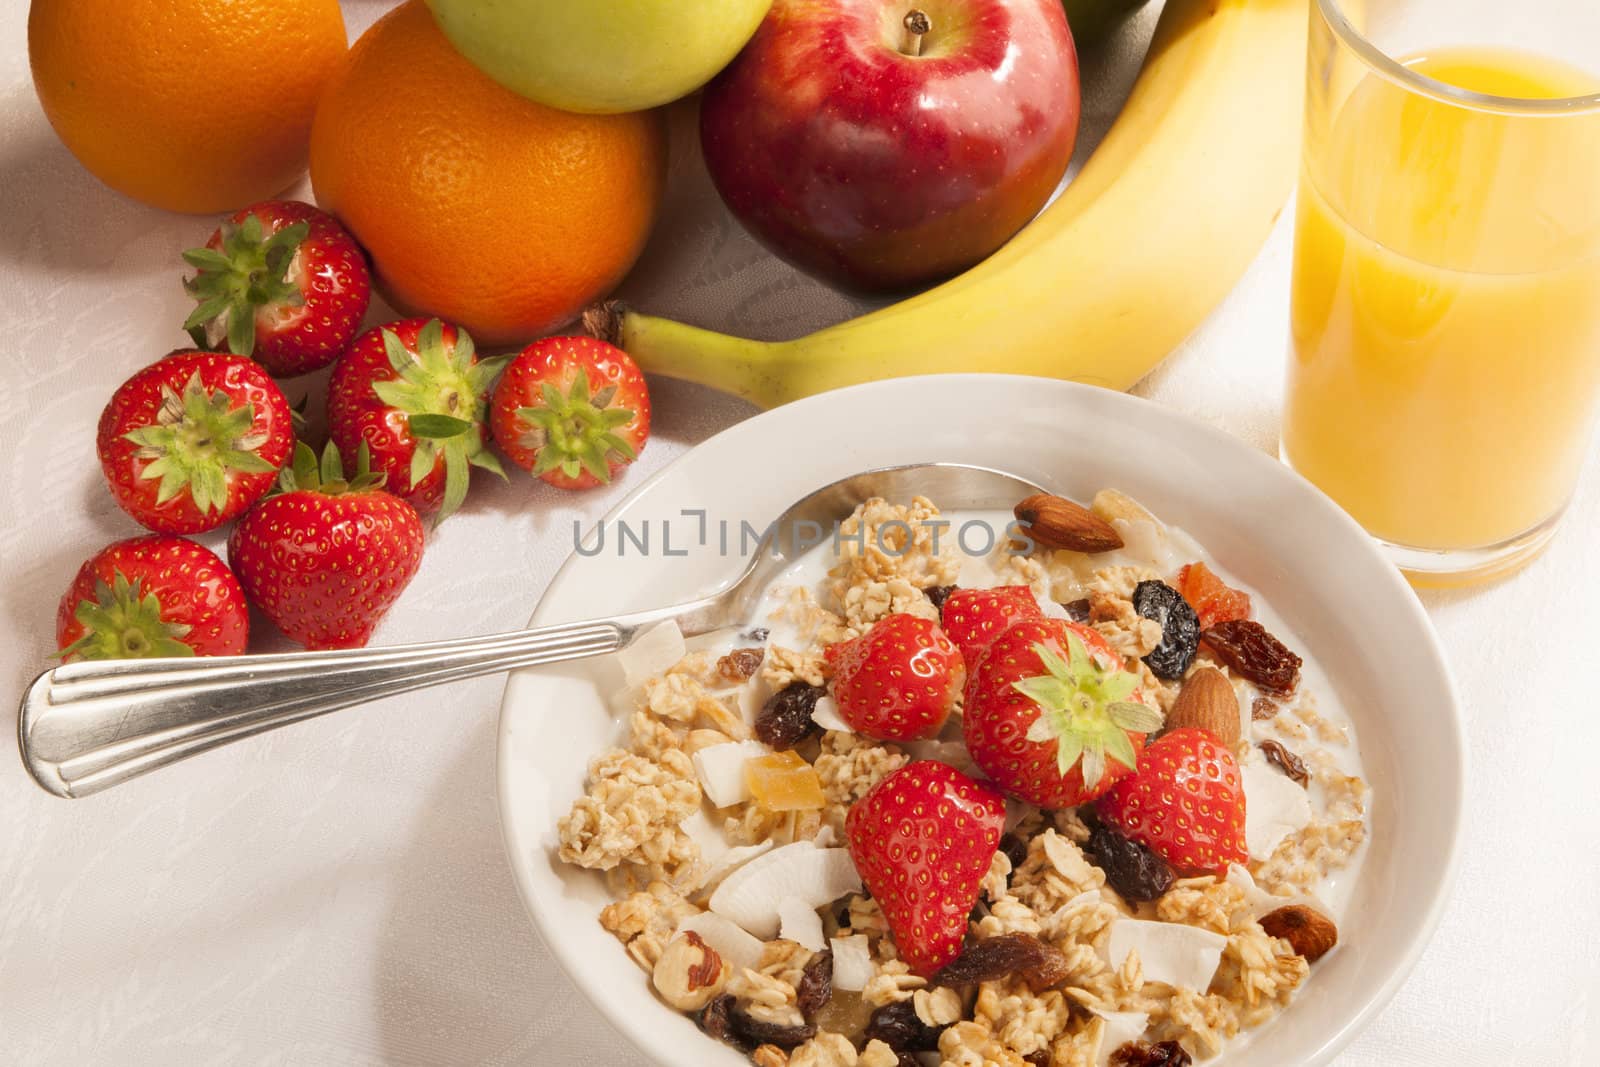 Bowl of cereal and fruits on tabletop - breakfast.